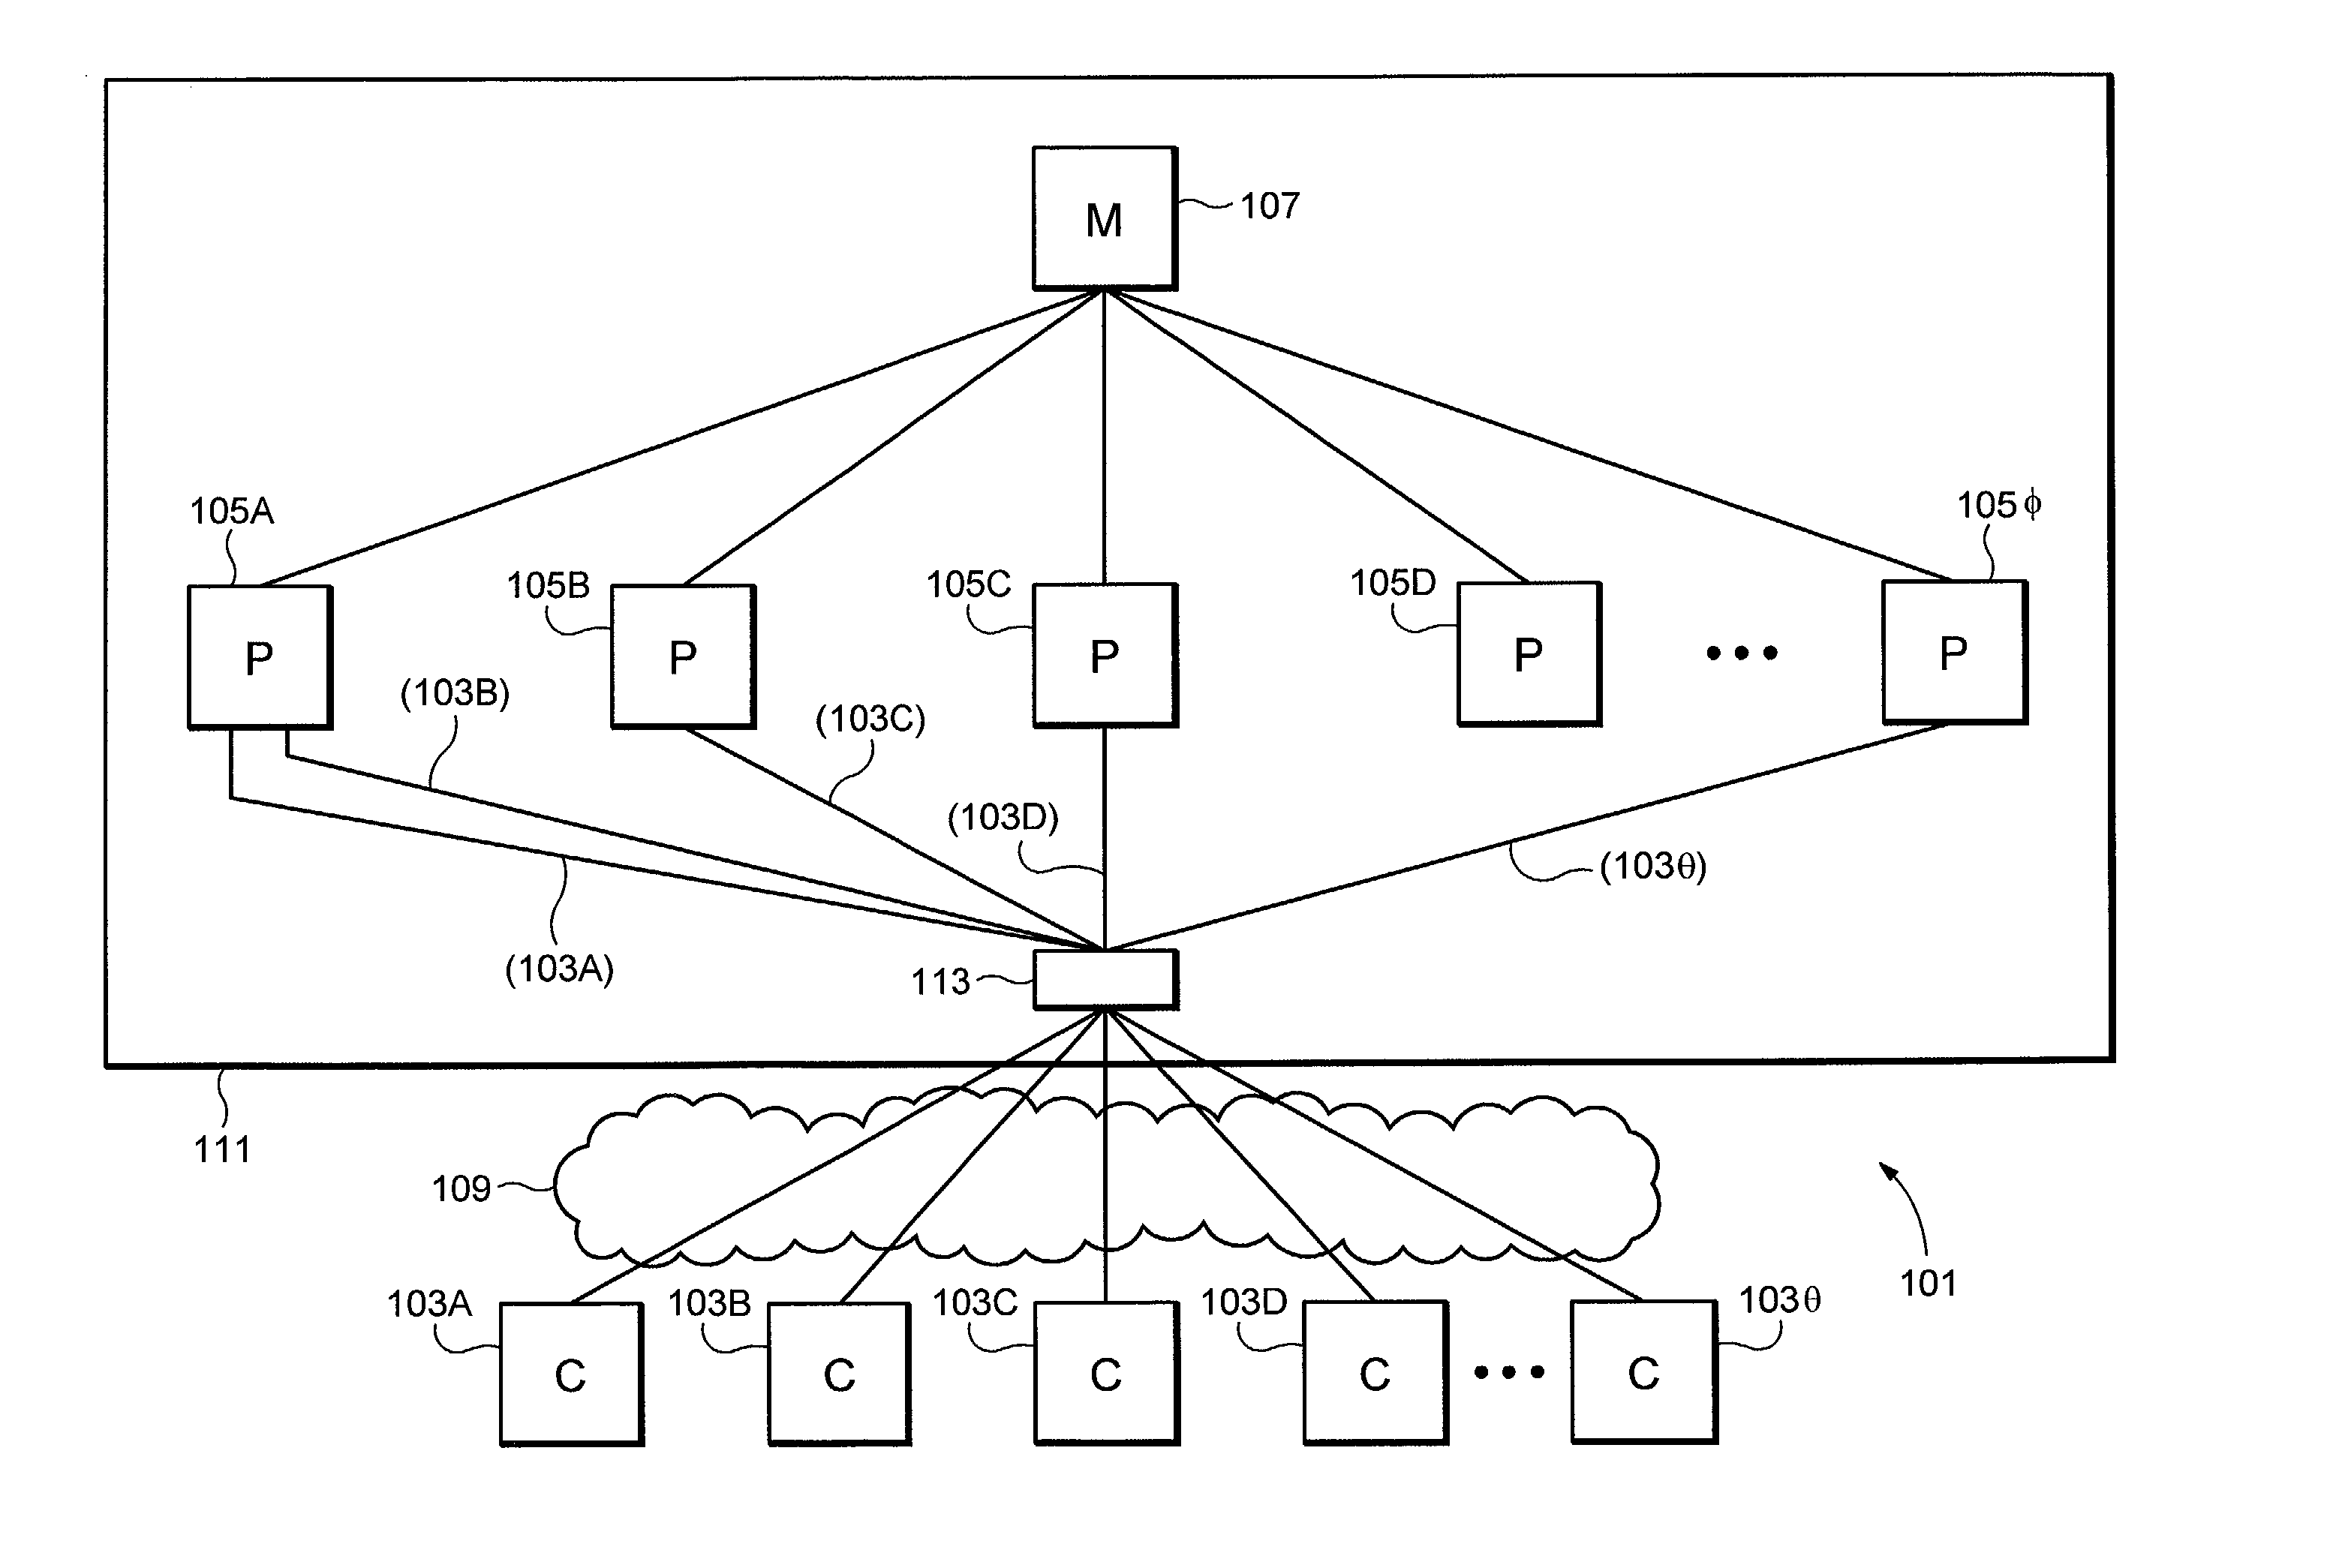 Distributed cache for state transfer operations